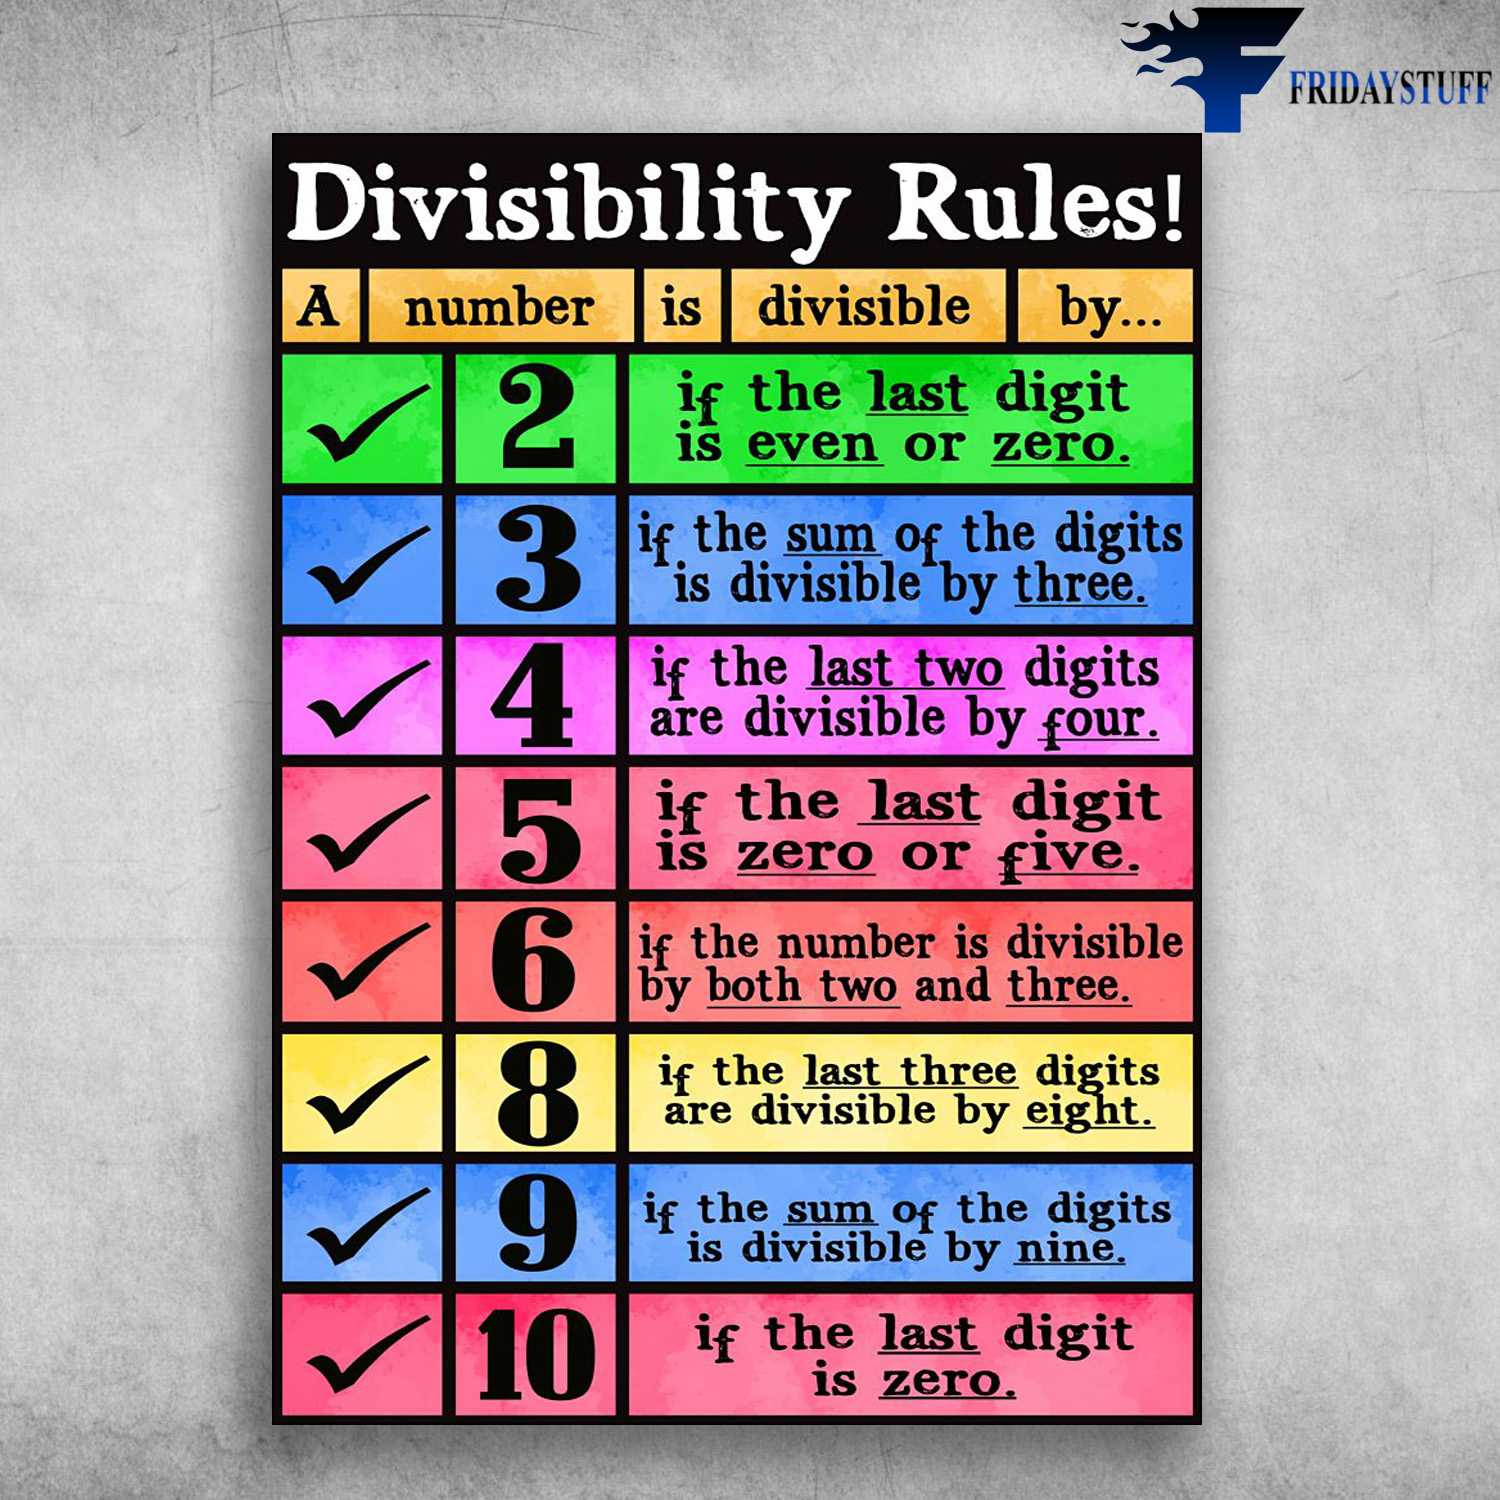 rules-of-divisibility-printable-printable-world-holiday